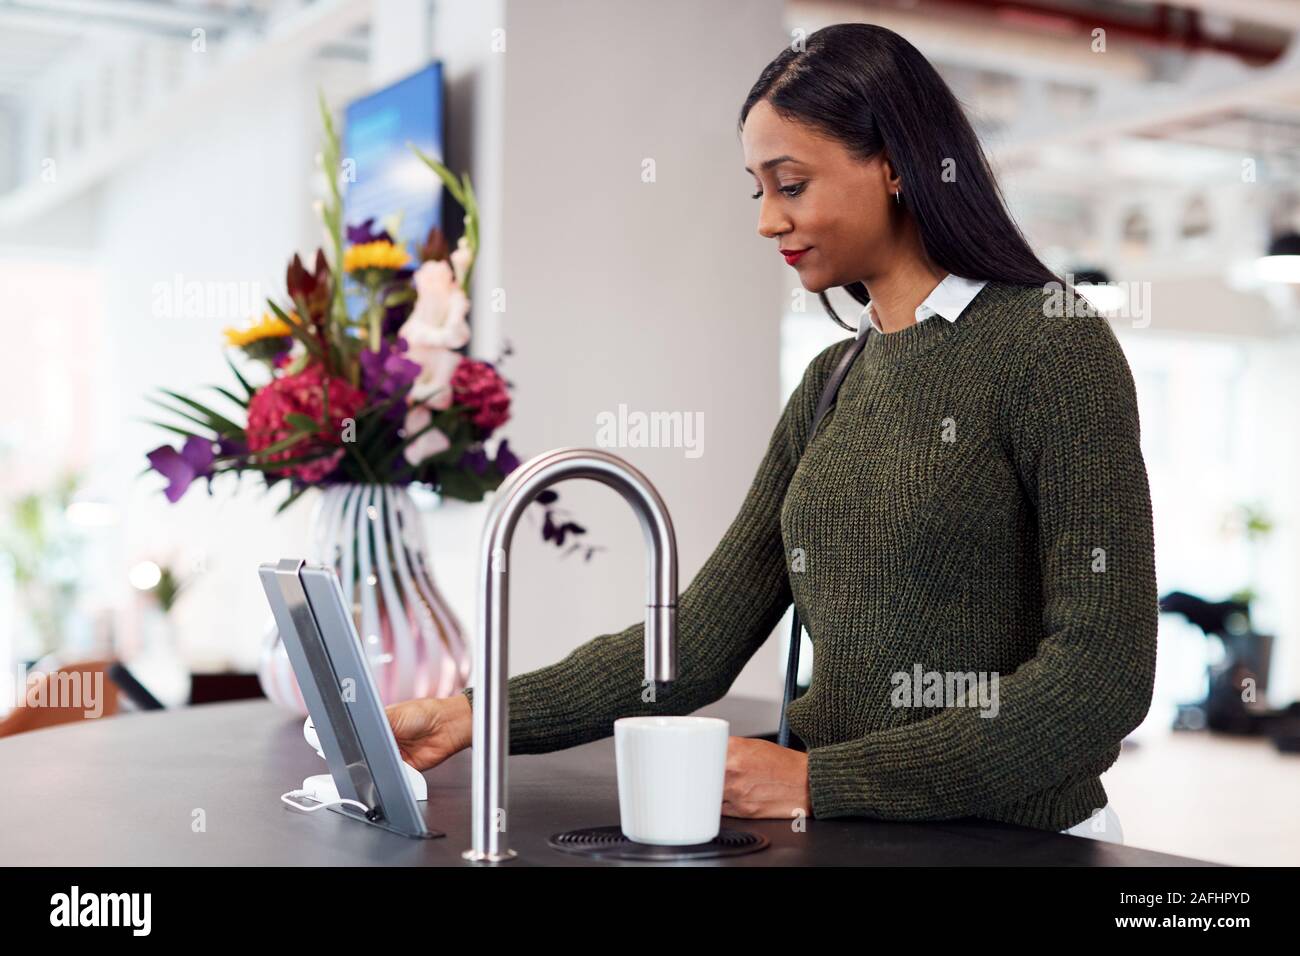 Businesswoman Getting Hot Drink From Automated Dispenser In Office Stock Photo